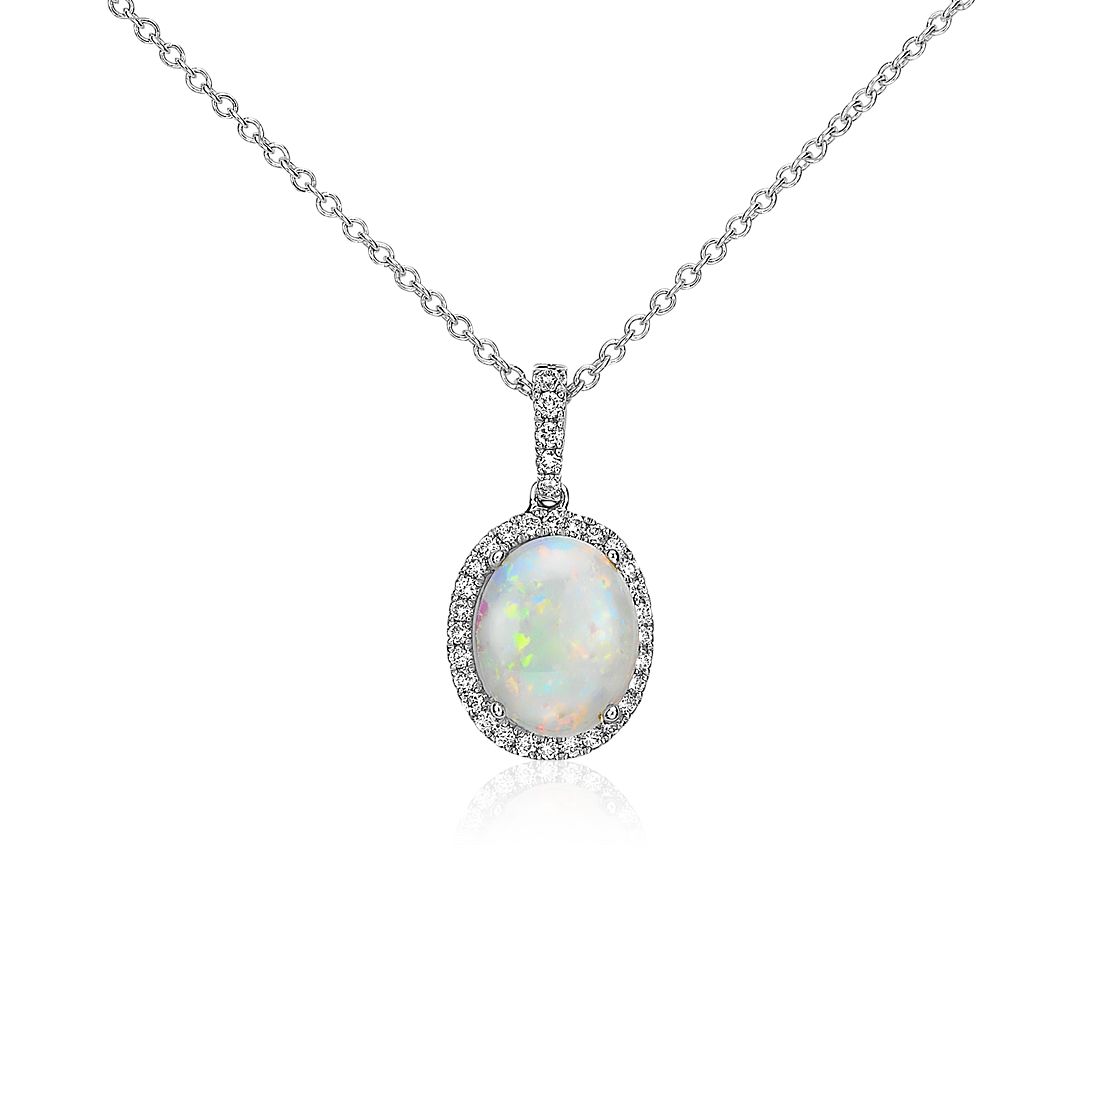 14K White Gold 10 x 8 MM Created Opal & .05 CTW Diamond 18 inch Pendant Necklace